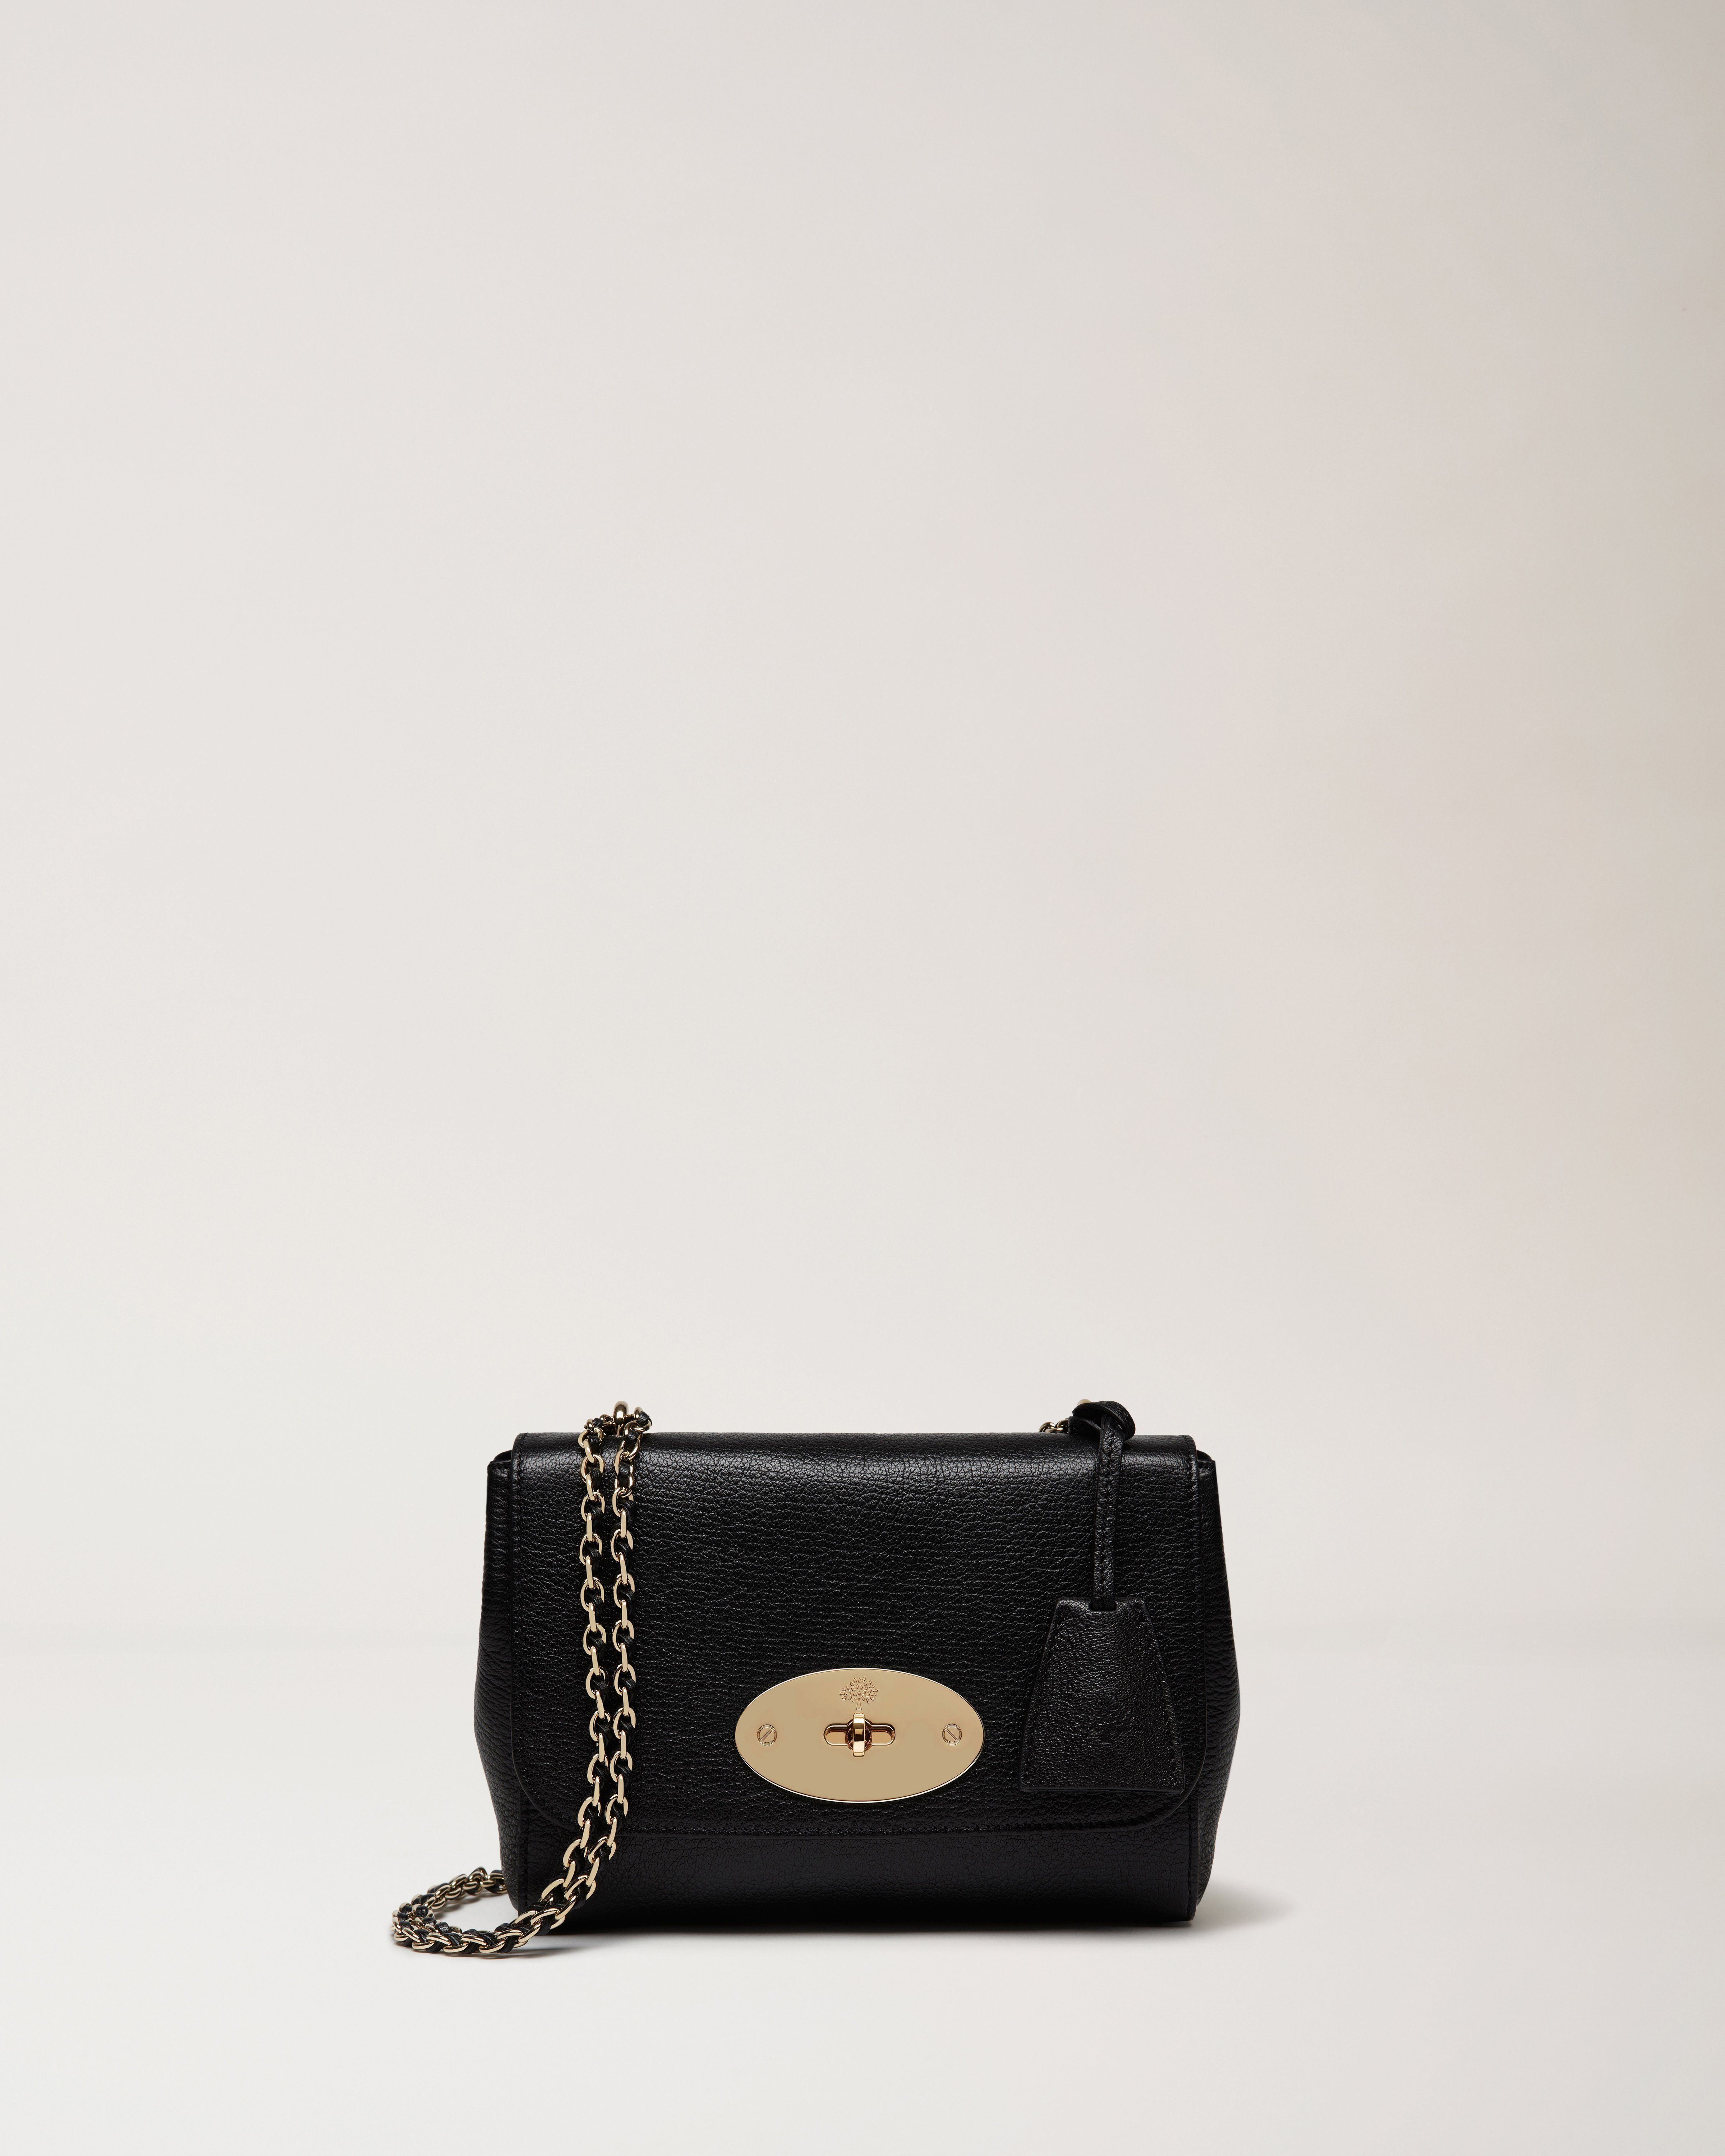 Mulberry Lily bag in Black Gold